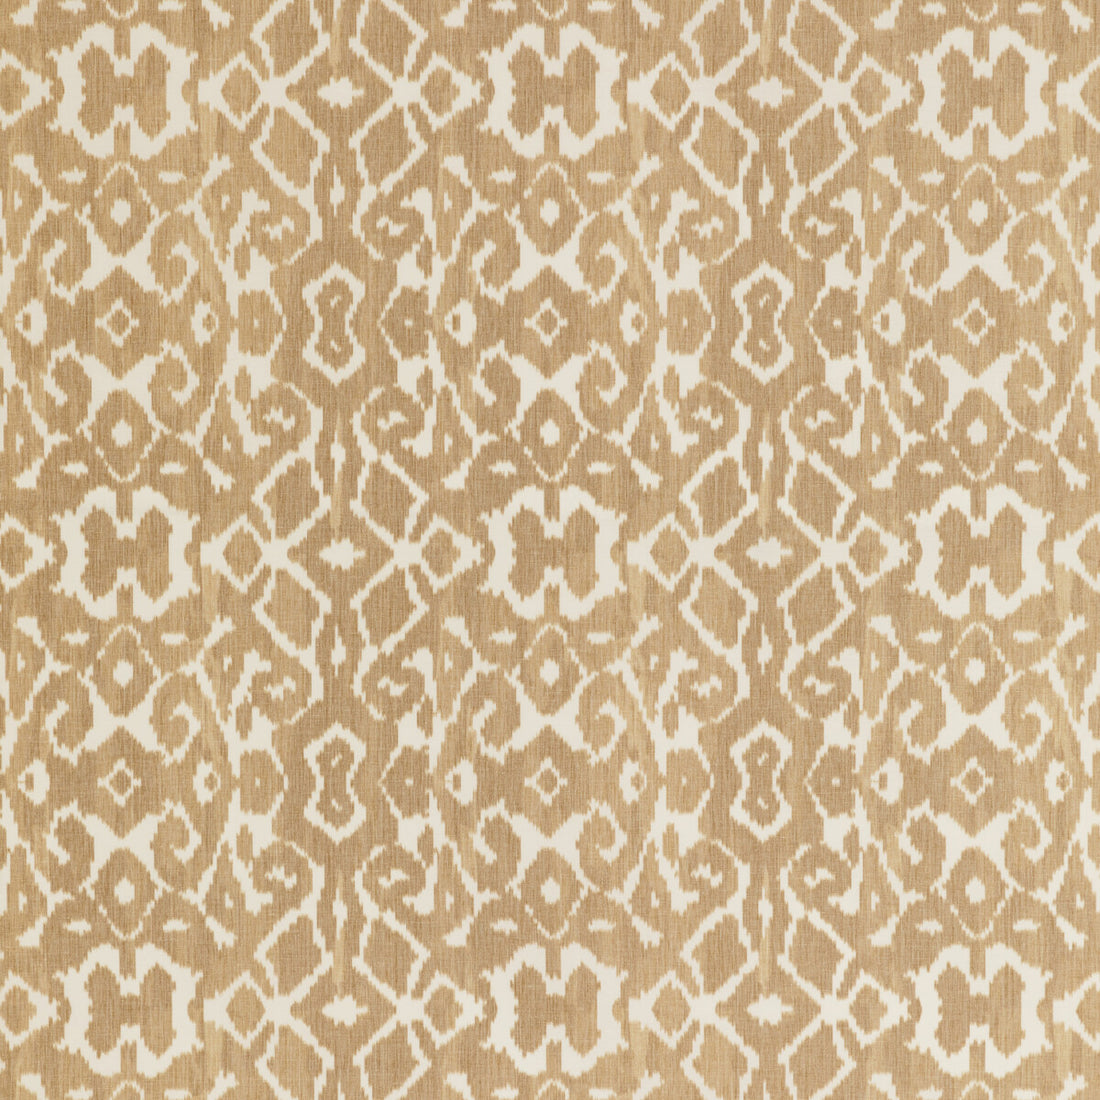 Toponas Print fabric in sand color - pattern 2020206.116.0 - by Lee Jofa in the Breckenridge collection